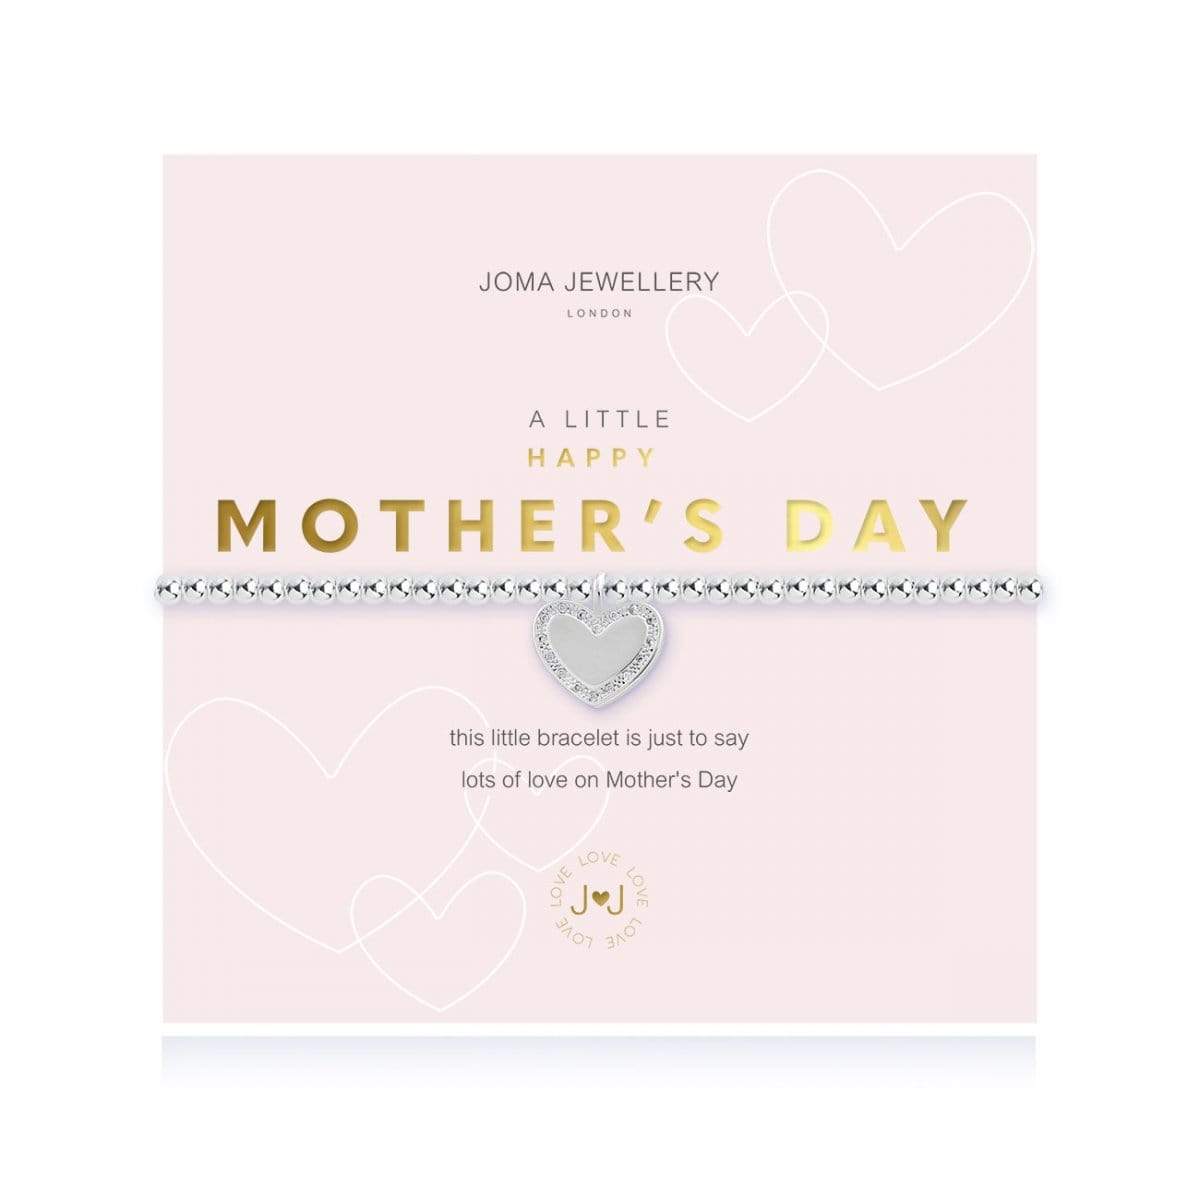 Joma Jewellery Bracelet Joma Jewellery Bracelet - a little Happy Mother's Day